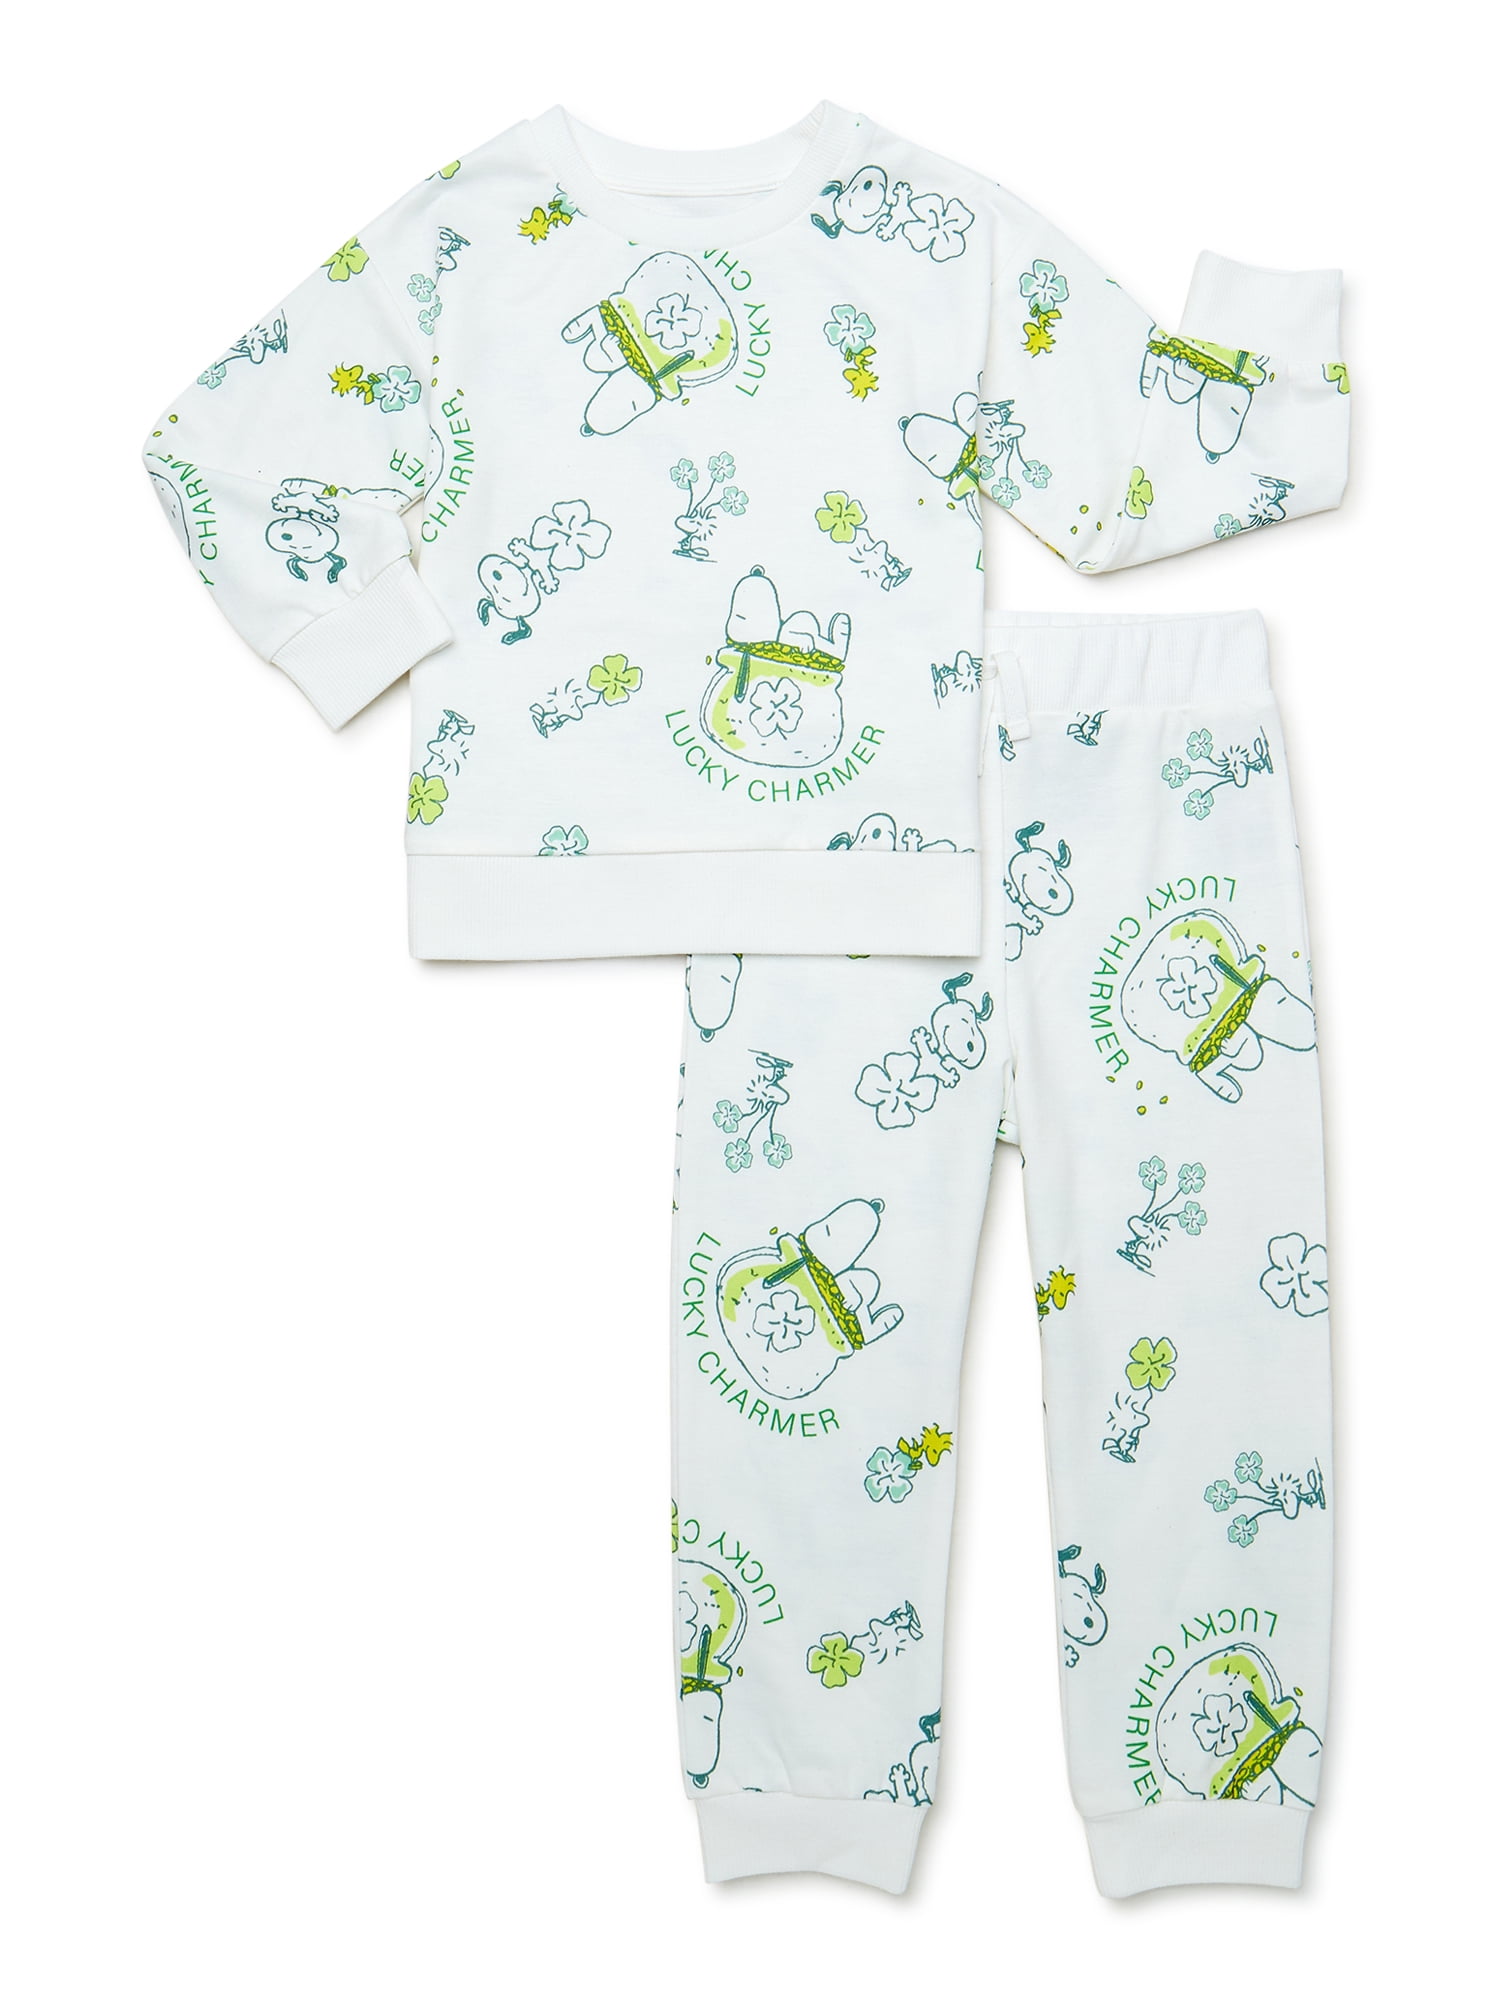 Snoopy St. Patrick's Day Toddler Boy Sweatshirt and Pants Outfit Set, 2-Piece, Sizes 12M-5T